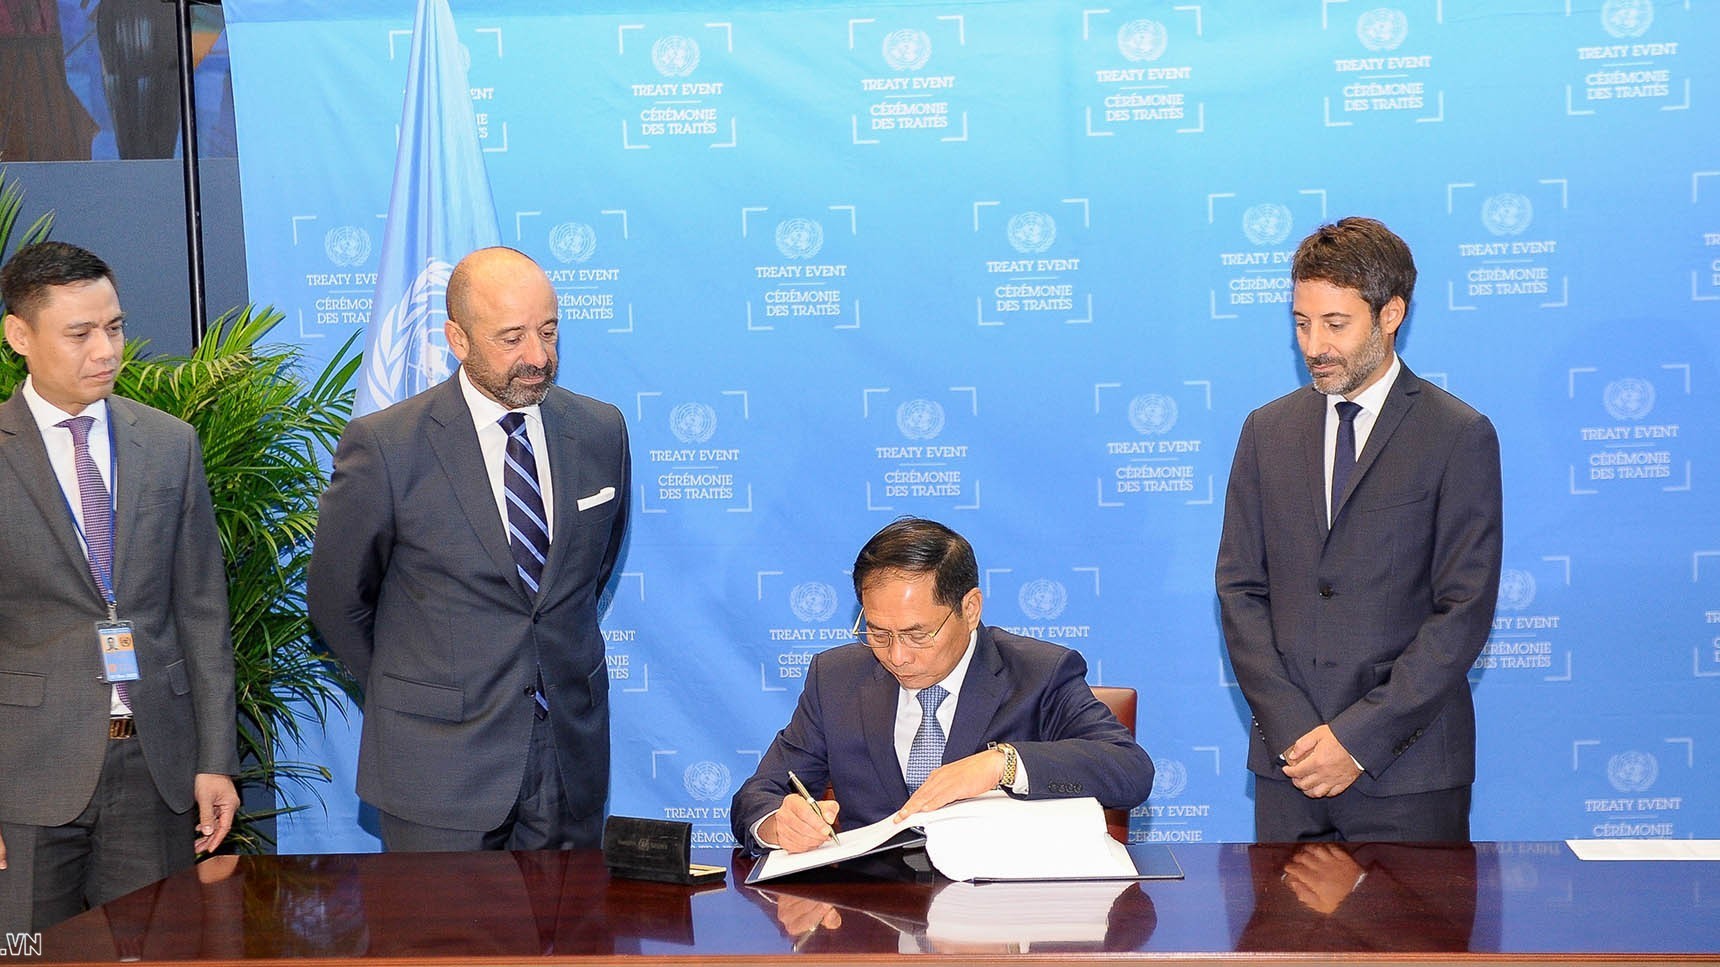 The significance of Vietnam's signing of the Agreement on the conservation and sustainable use of biodiversity in waters beyond national jurisdiction